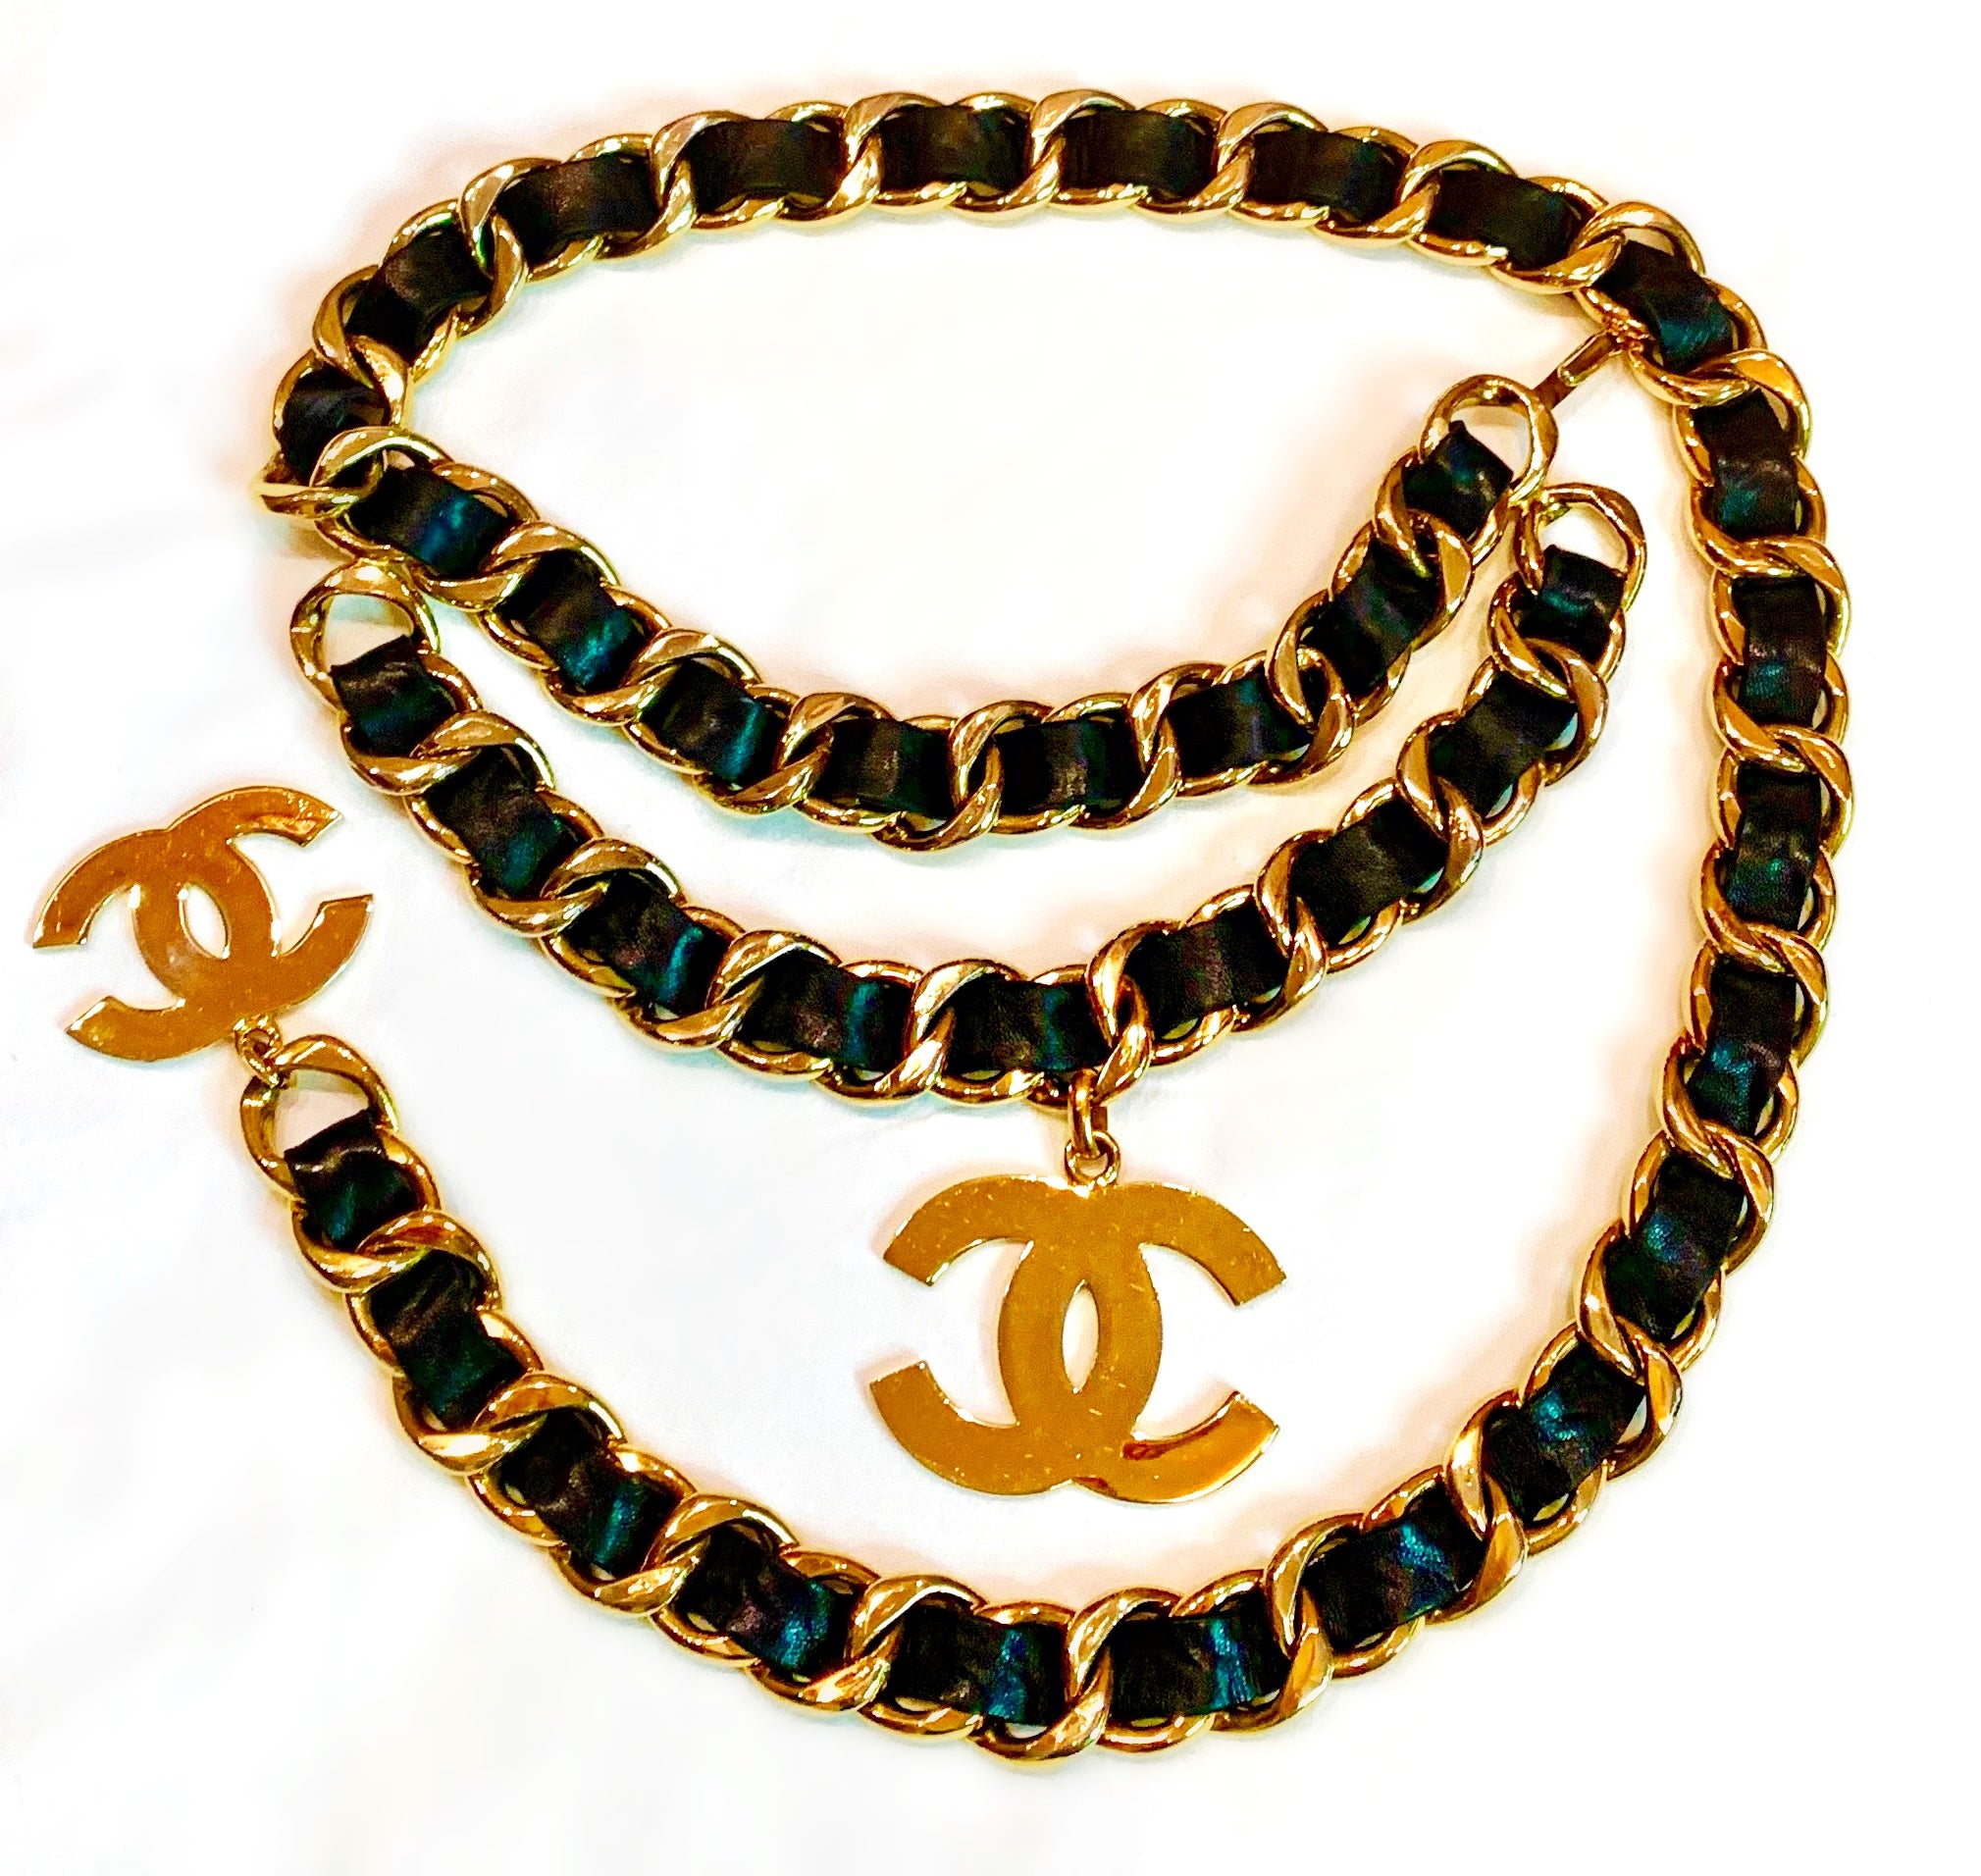 aprococo - CHANEL massive Chain Belt Necklace w/ stunning BIG Charms